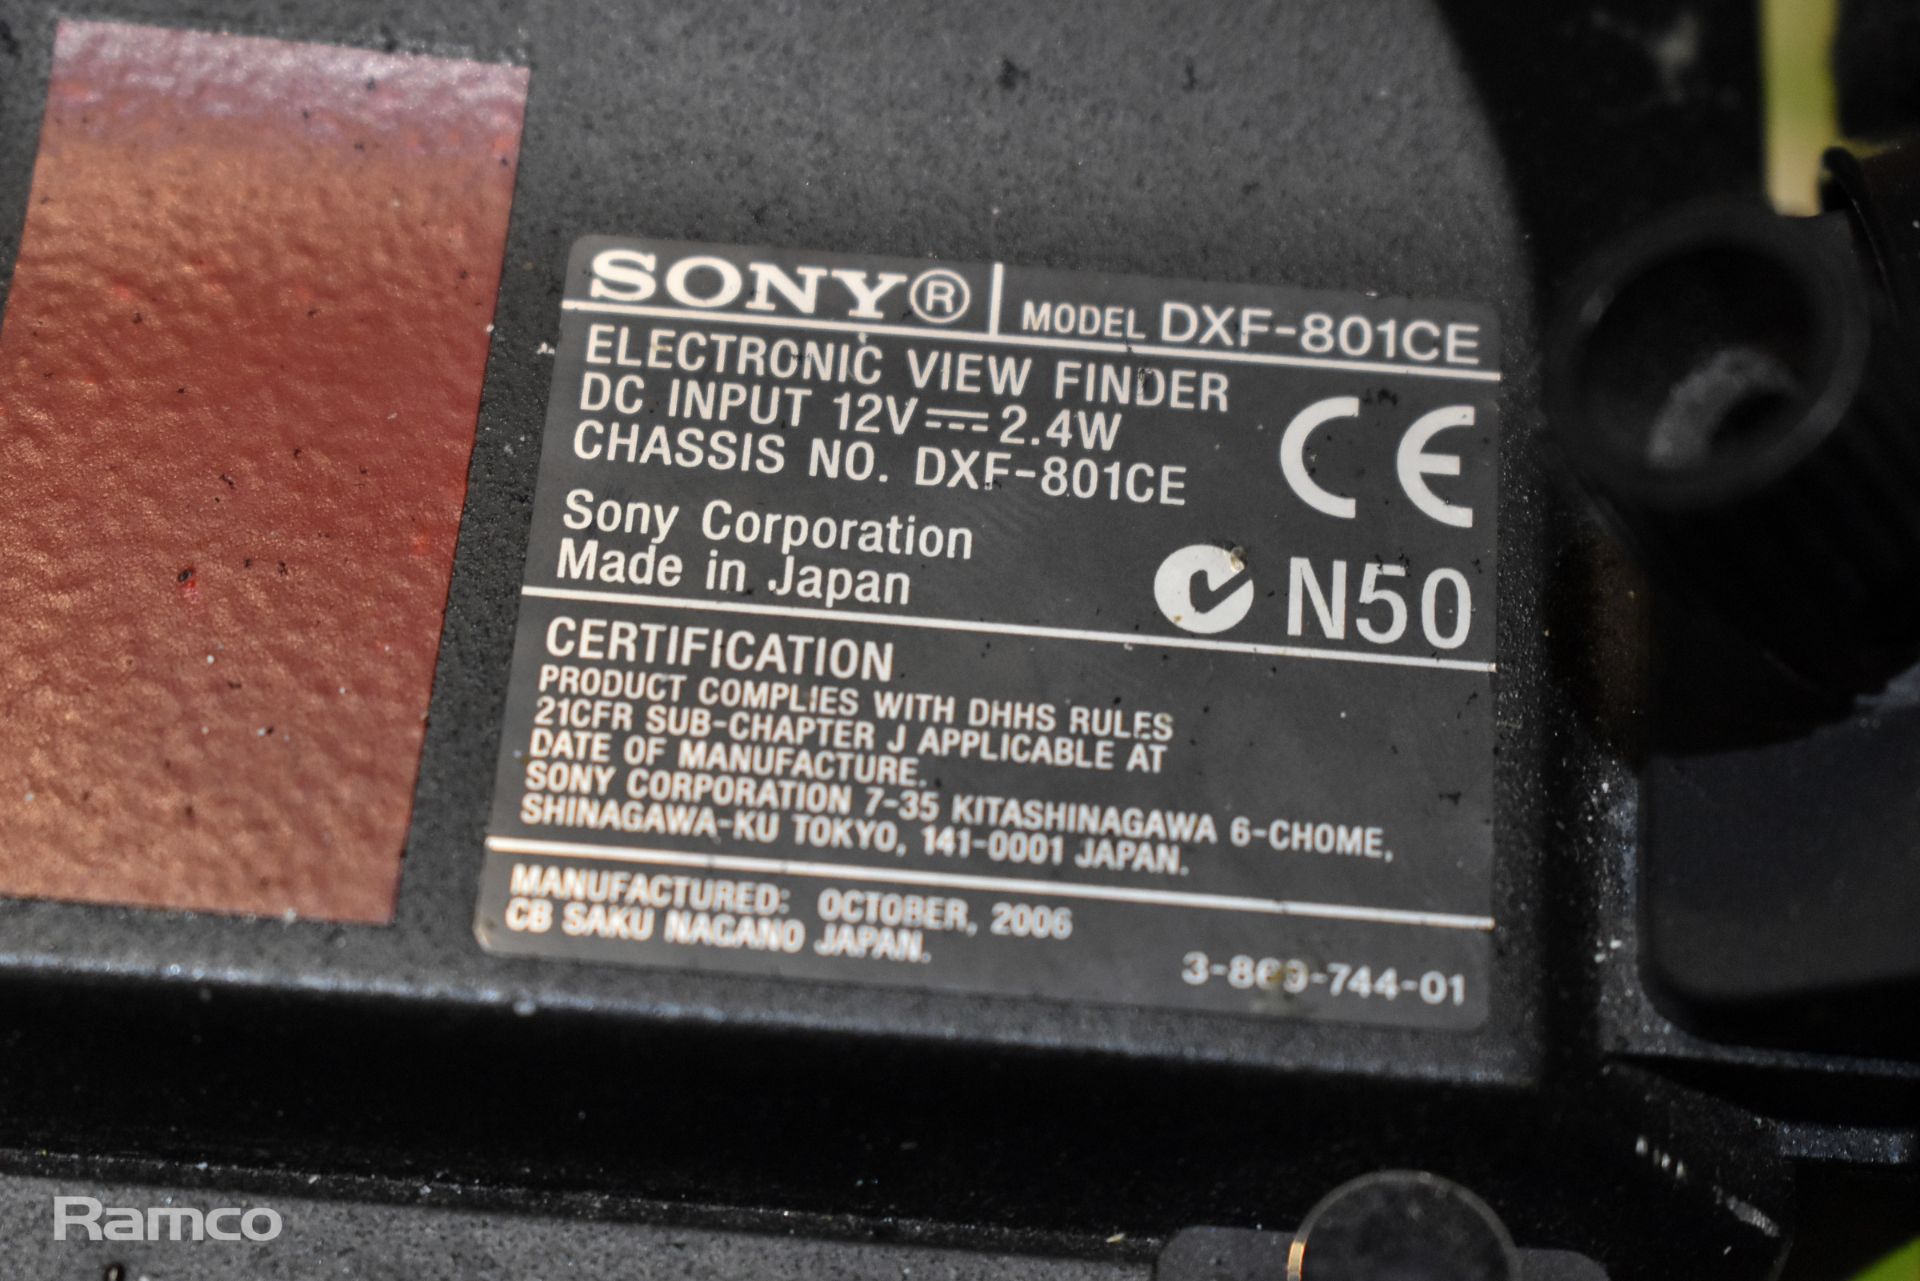 Sony DSR-450WSP digital camcorder with sony DXF-801CE viewfinder - NO LENS - Image 13 of 14